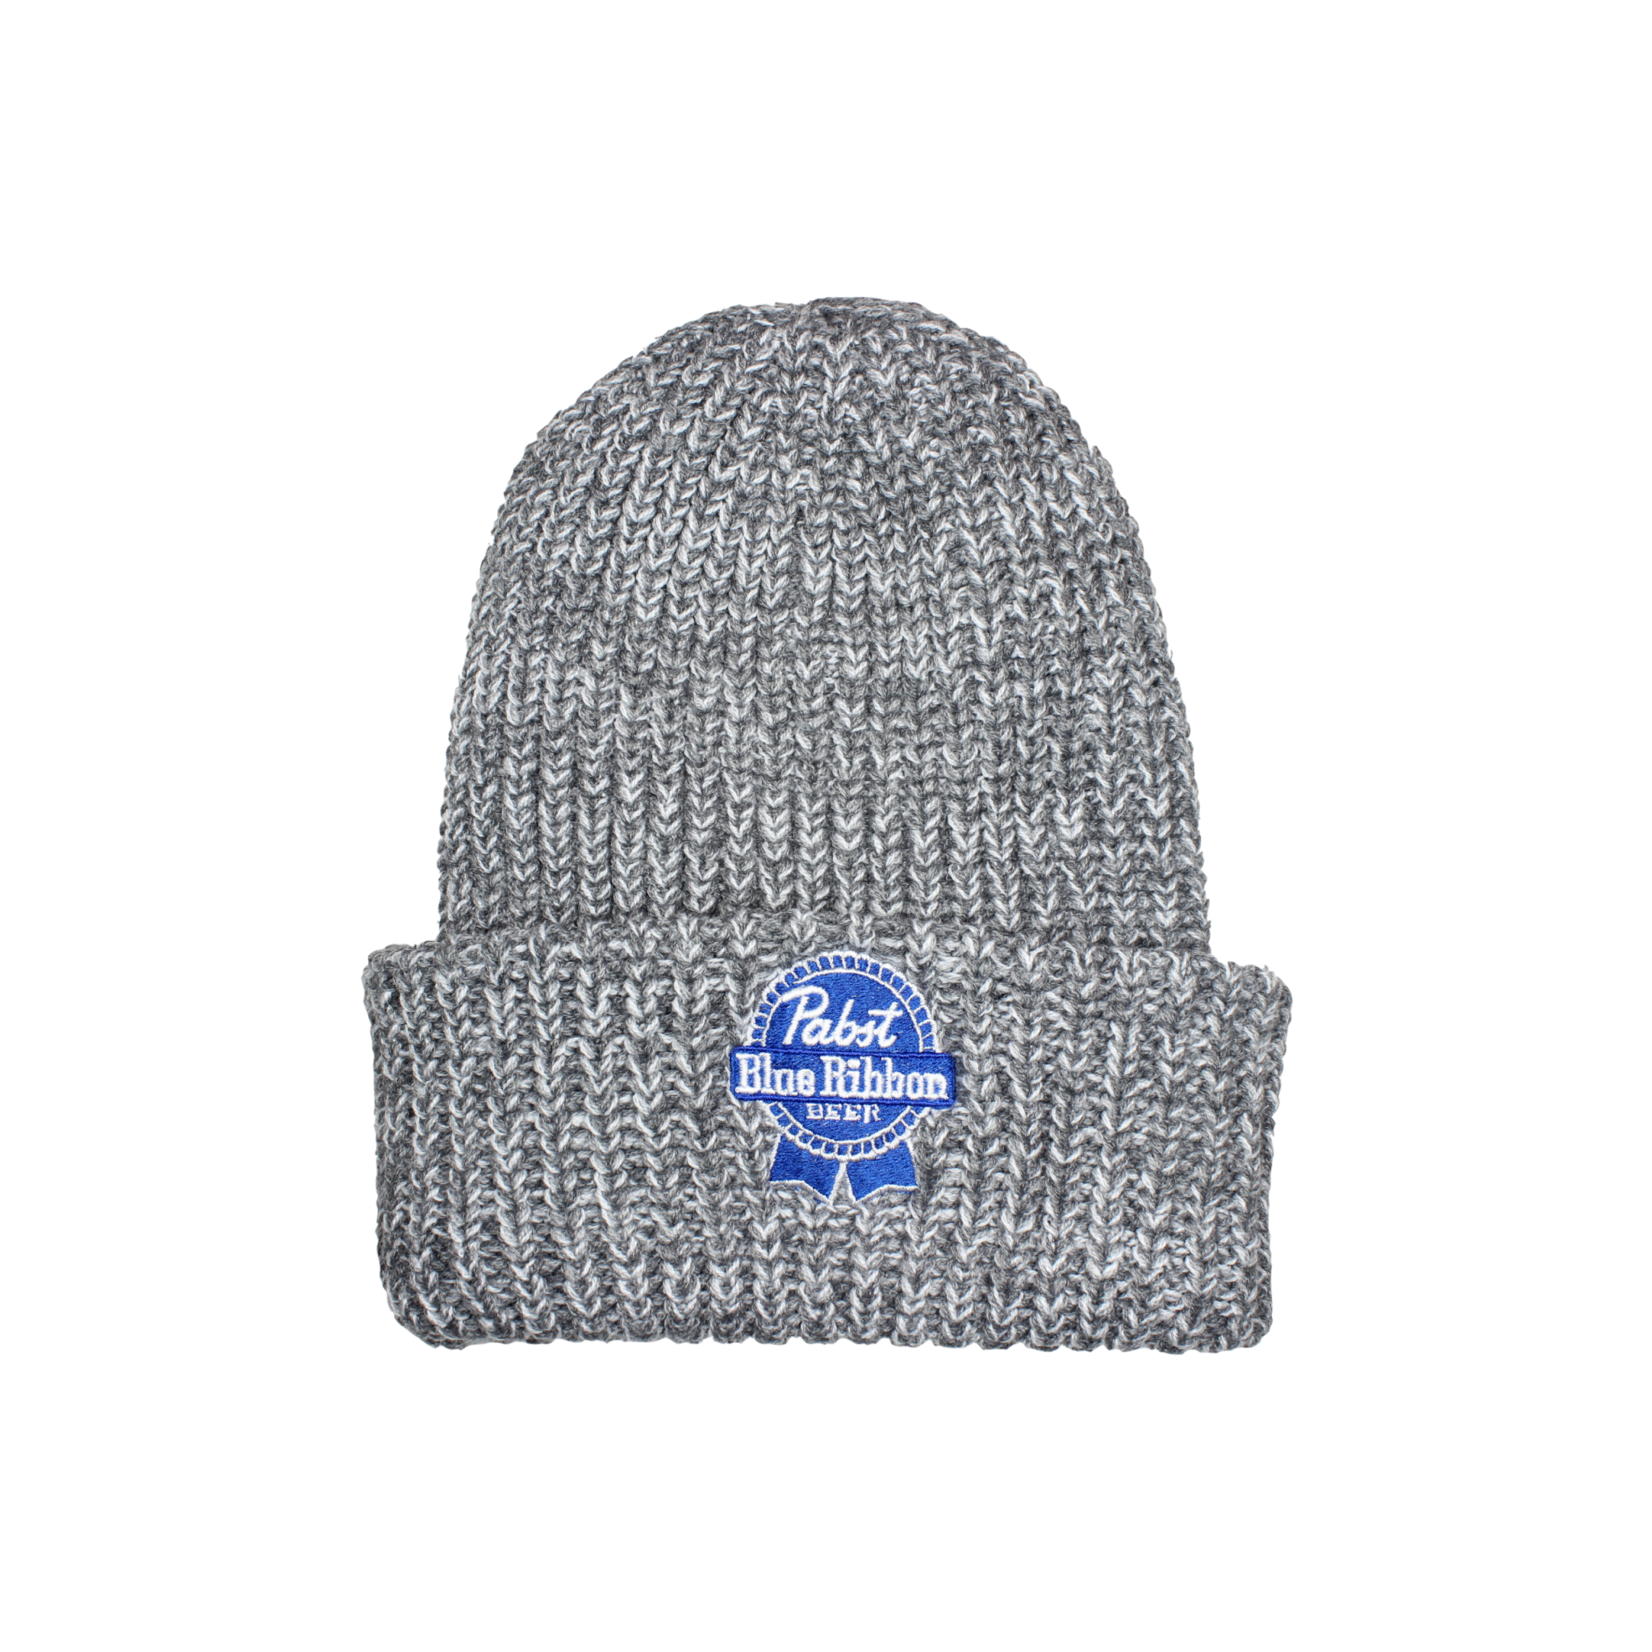 Pabst Pabst Ribbon Grey/White Chunky Knit Cuffed Beanie